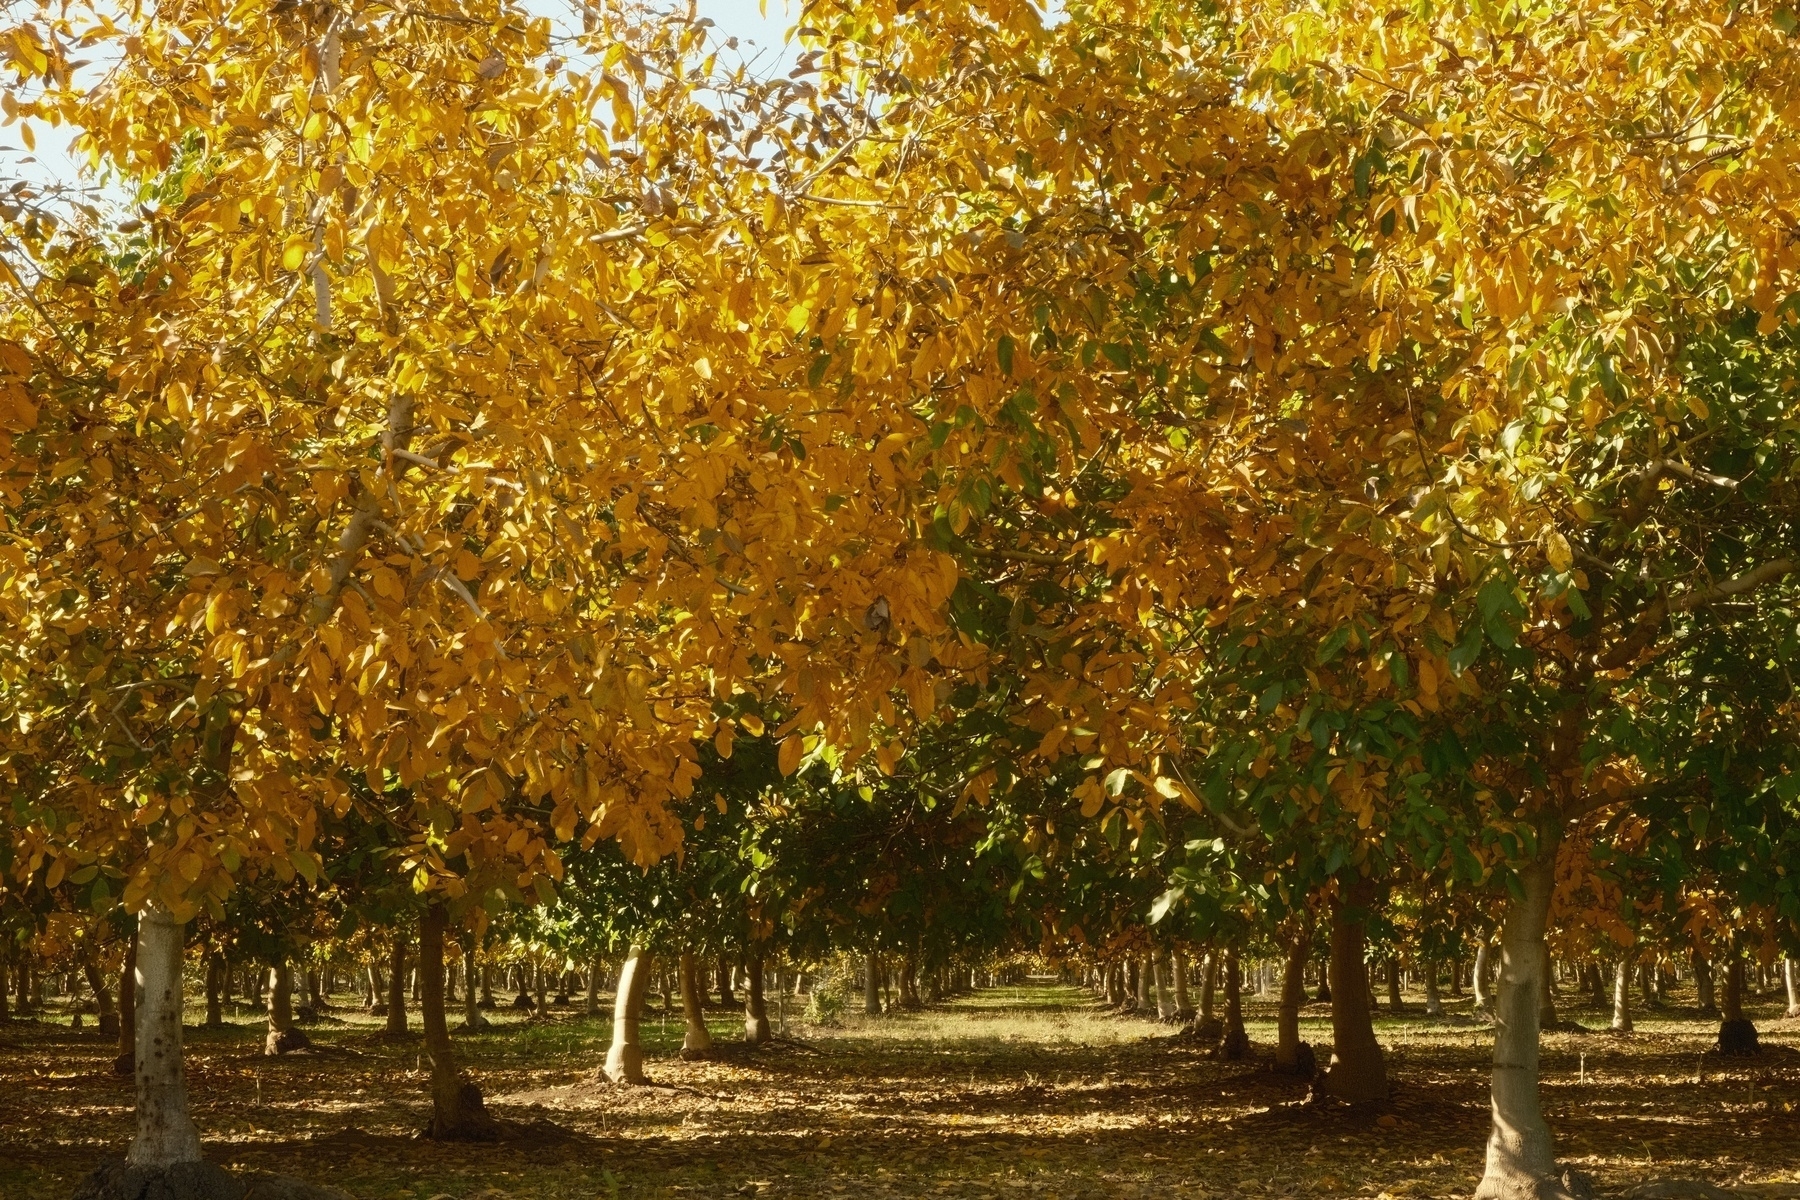 20 foot or so spaced rows of walnut trees with their bright yellow fall foliage.